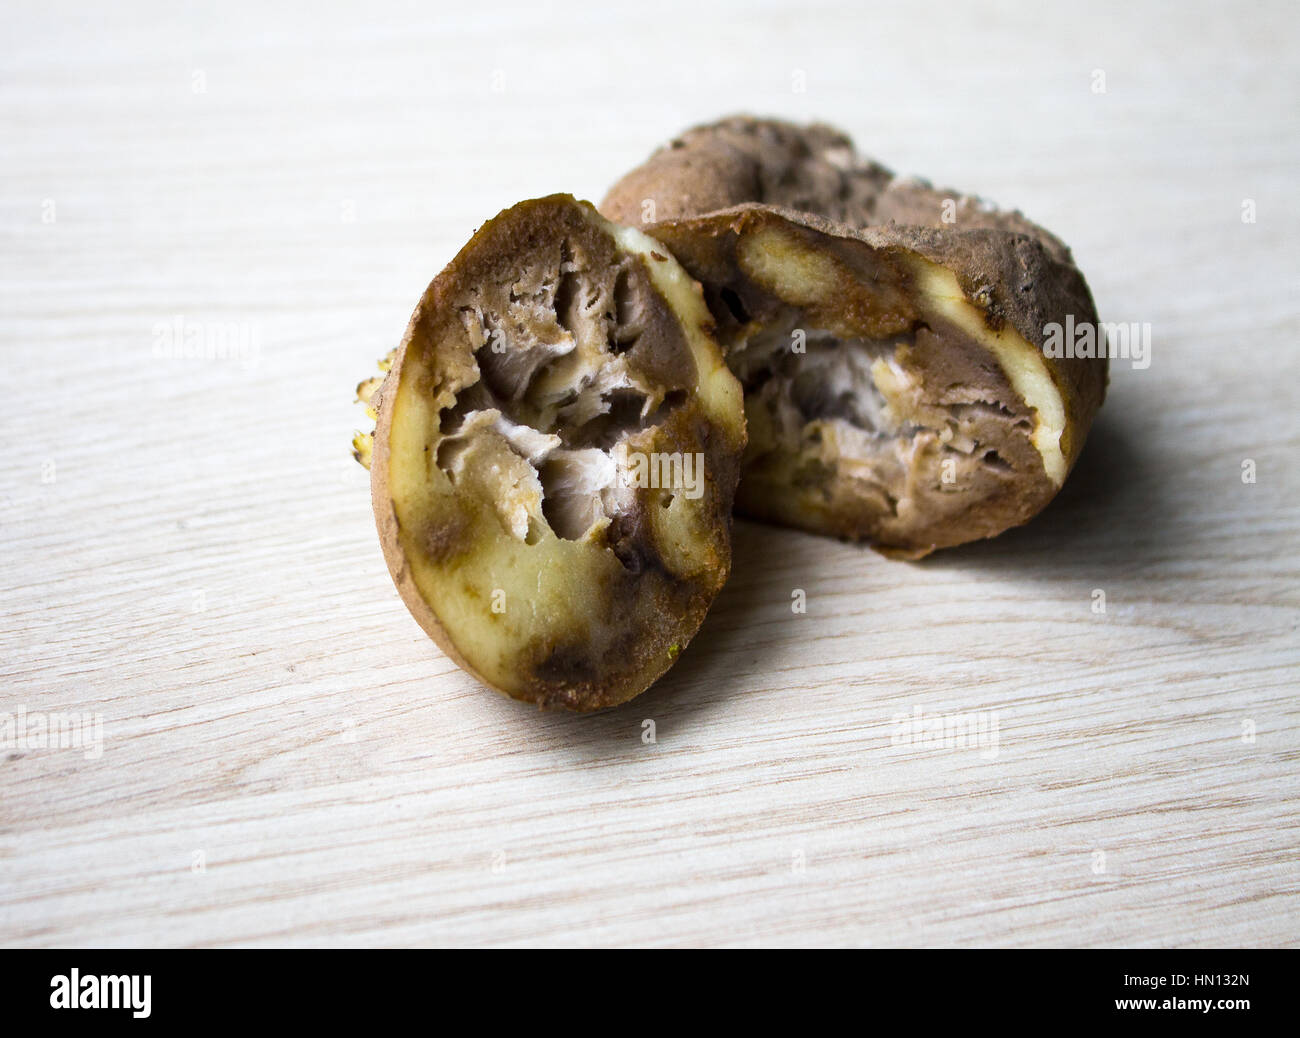 the spoiled potatoes, can be used for illustrations and design Stock Photo